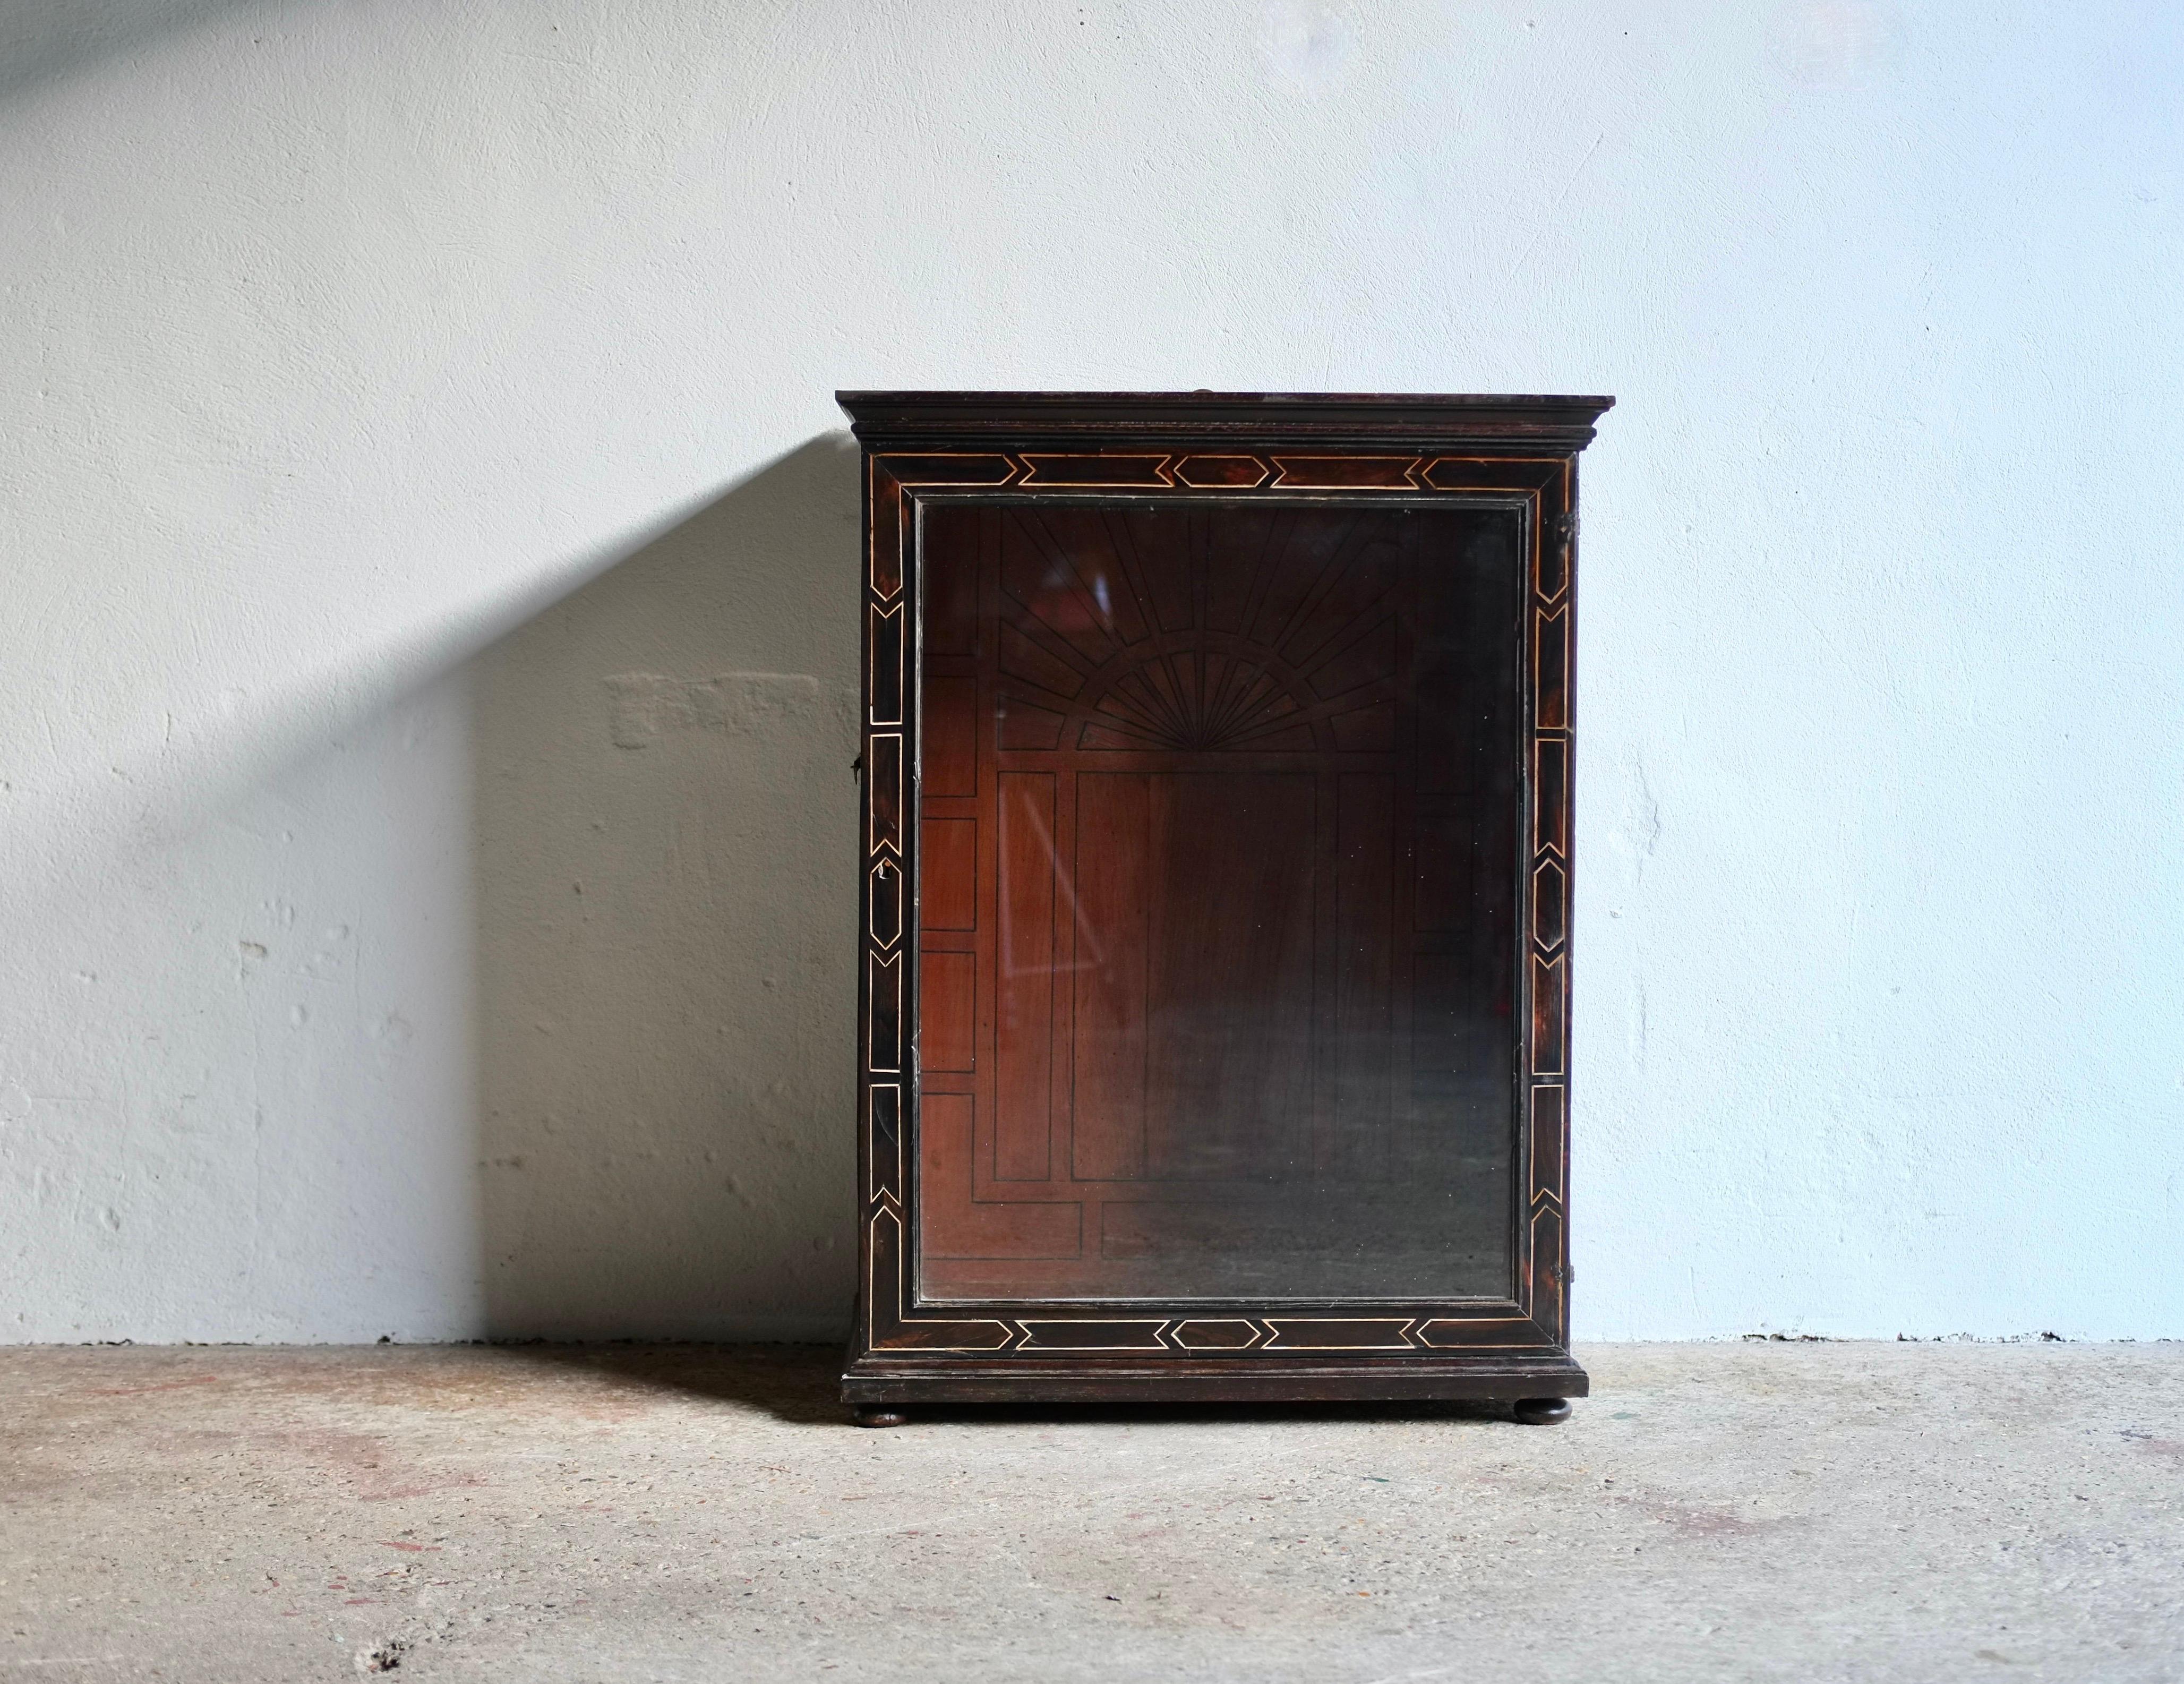 Antique ebonised fruitwood geometric inlaid pier cabinet, circa 19th century, Italy. 

In good condition. The glass in the door is not original. The inlay is believed to be ivory, as this is under 10% of the composition we have obtained an Ivory